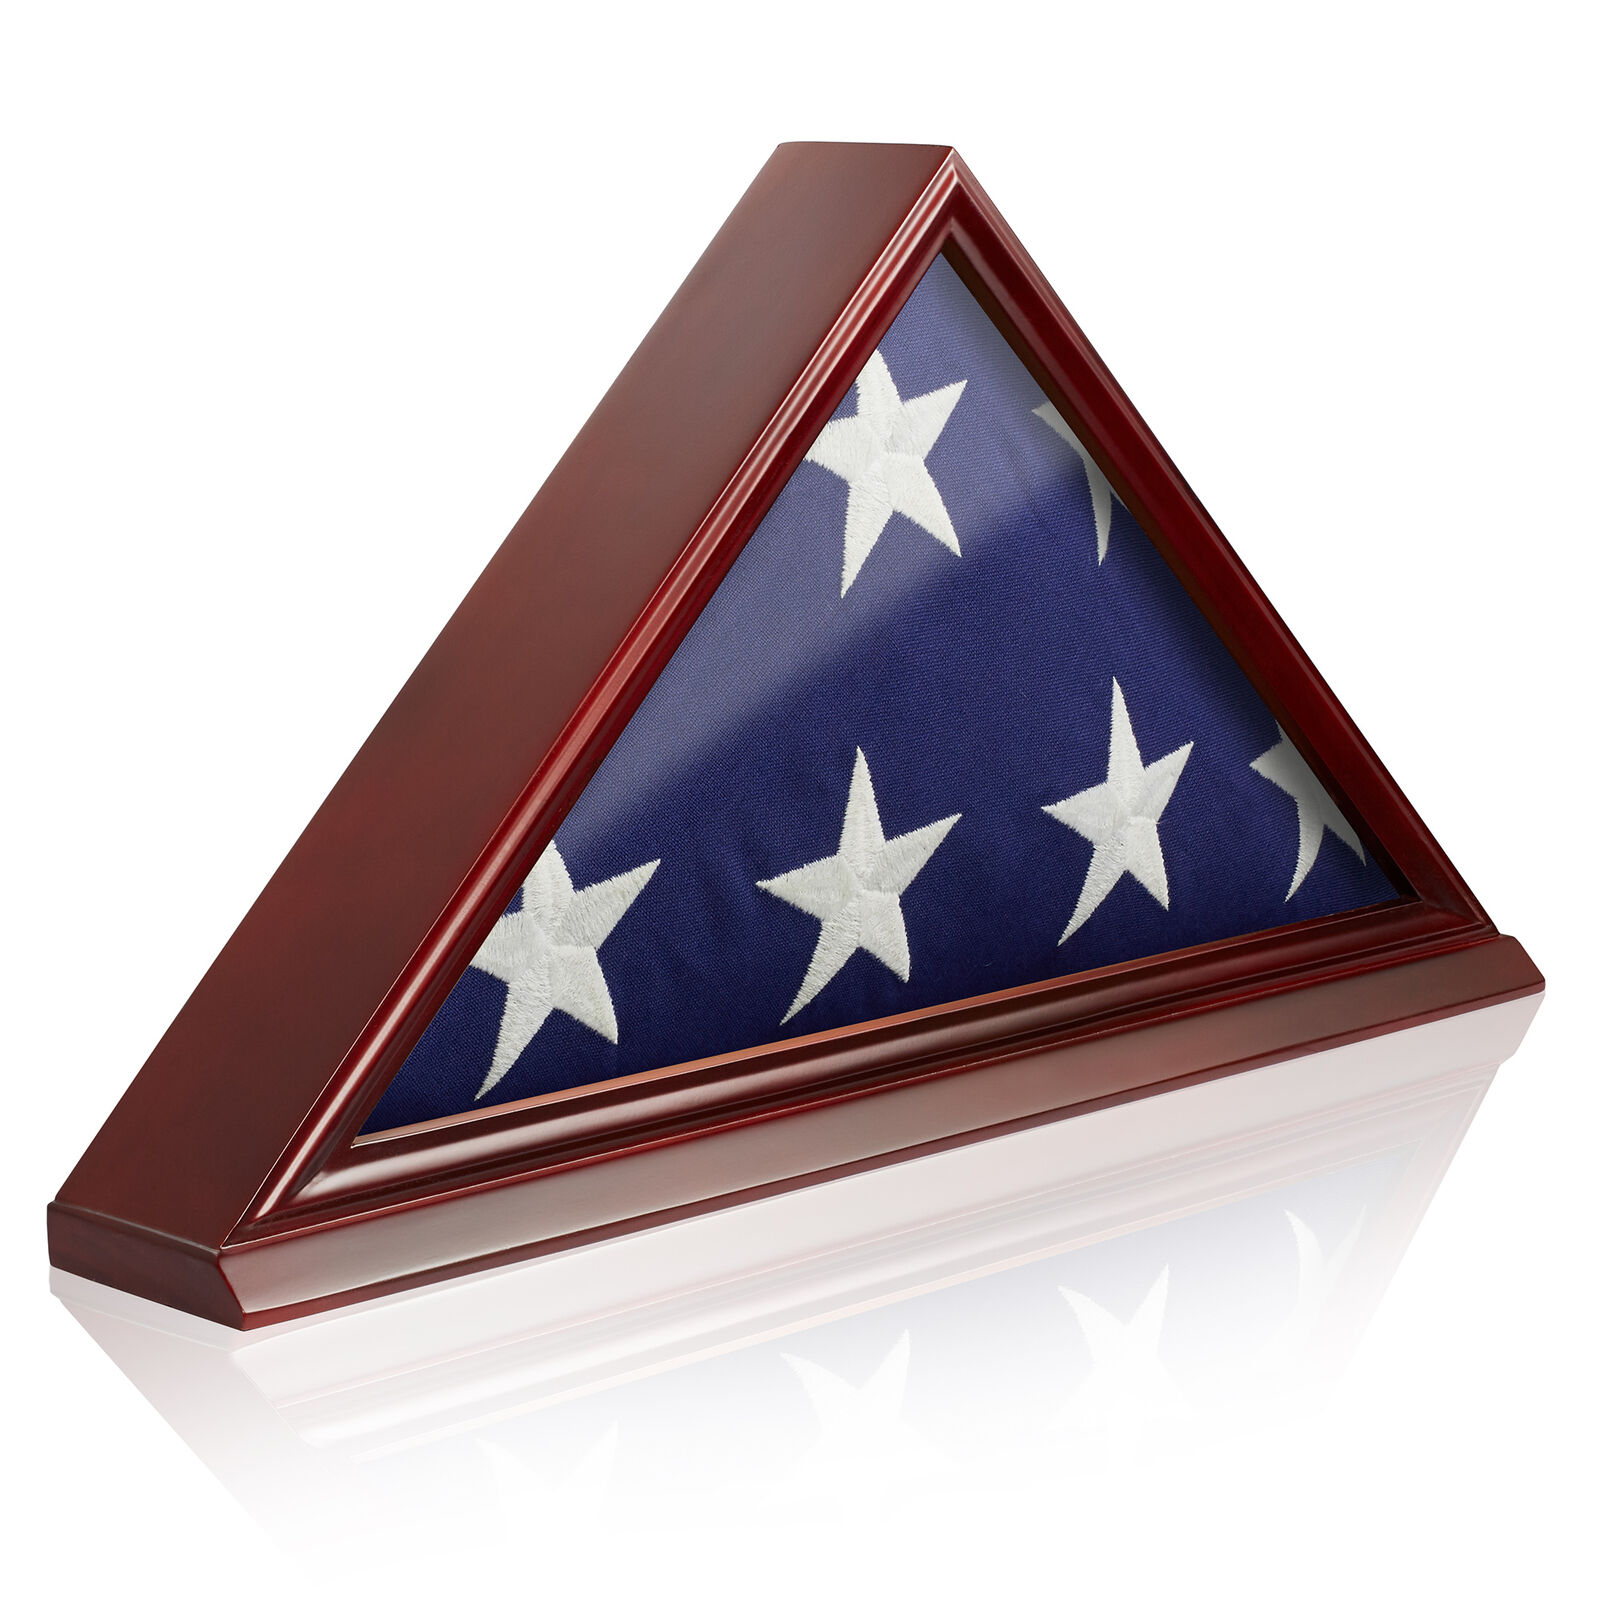 Burial Memorial Flag Display Case for 5' X 9' Folded, Solid Wood Cherry Finish